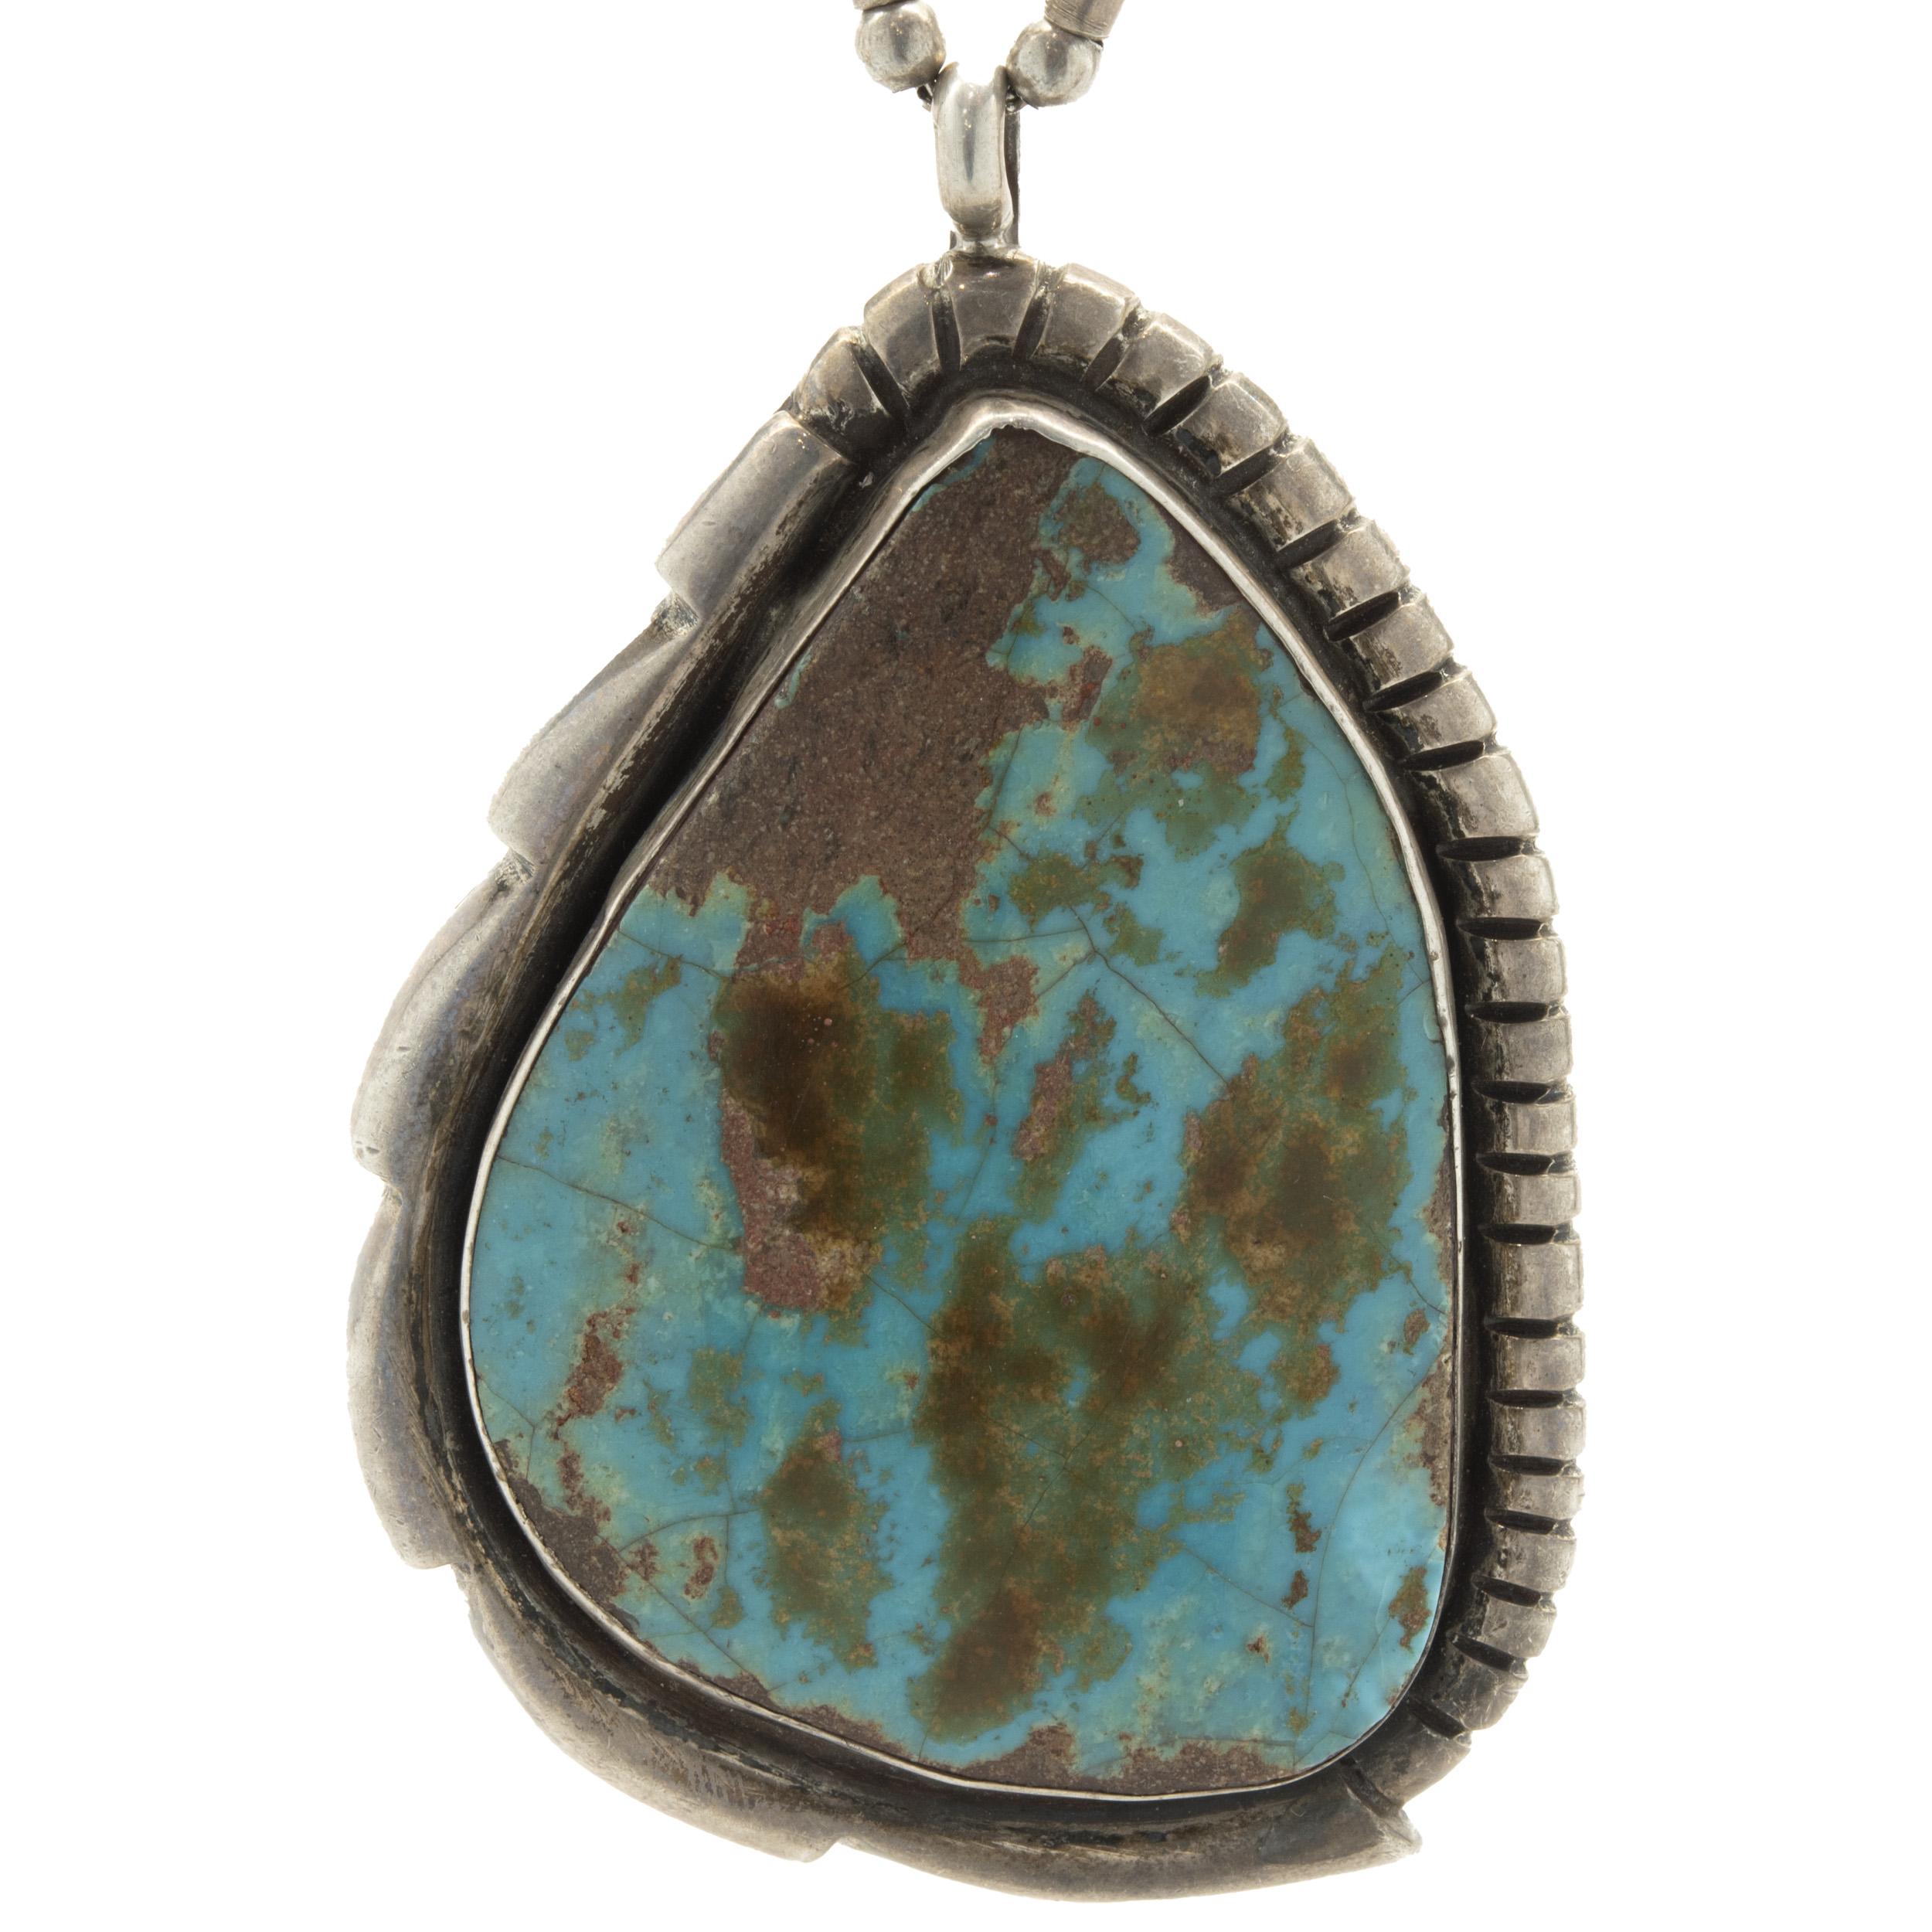 Designer: Benny Chapo
Material: sterling silver
Weight:  102.90 grams
Dimensions: necklace measures 25-inches in length 